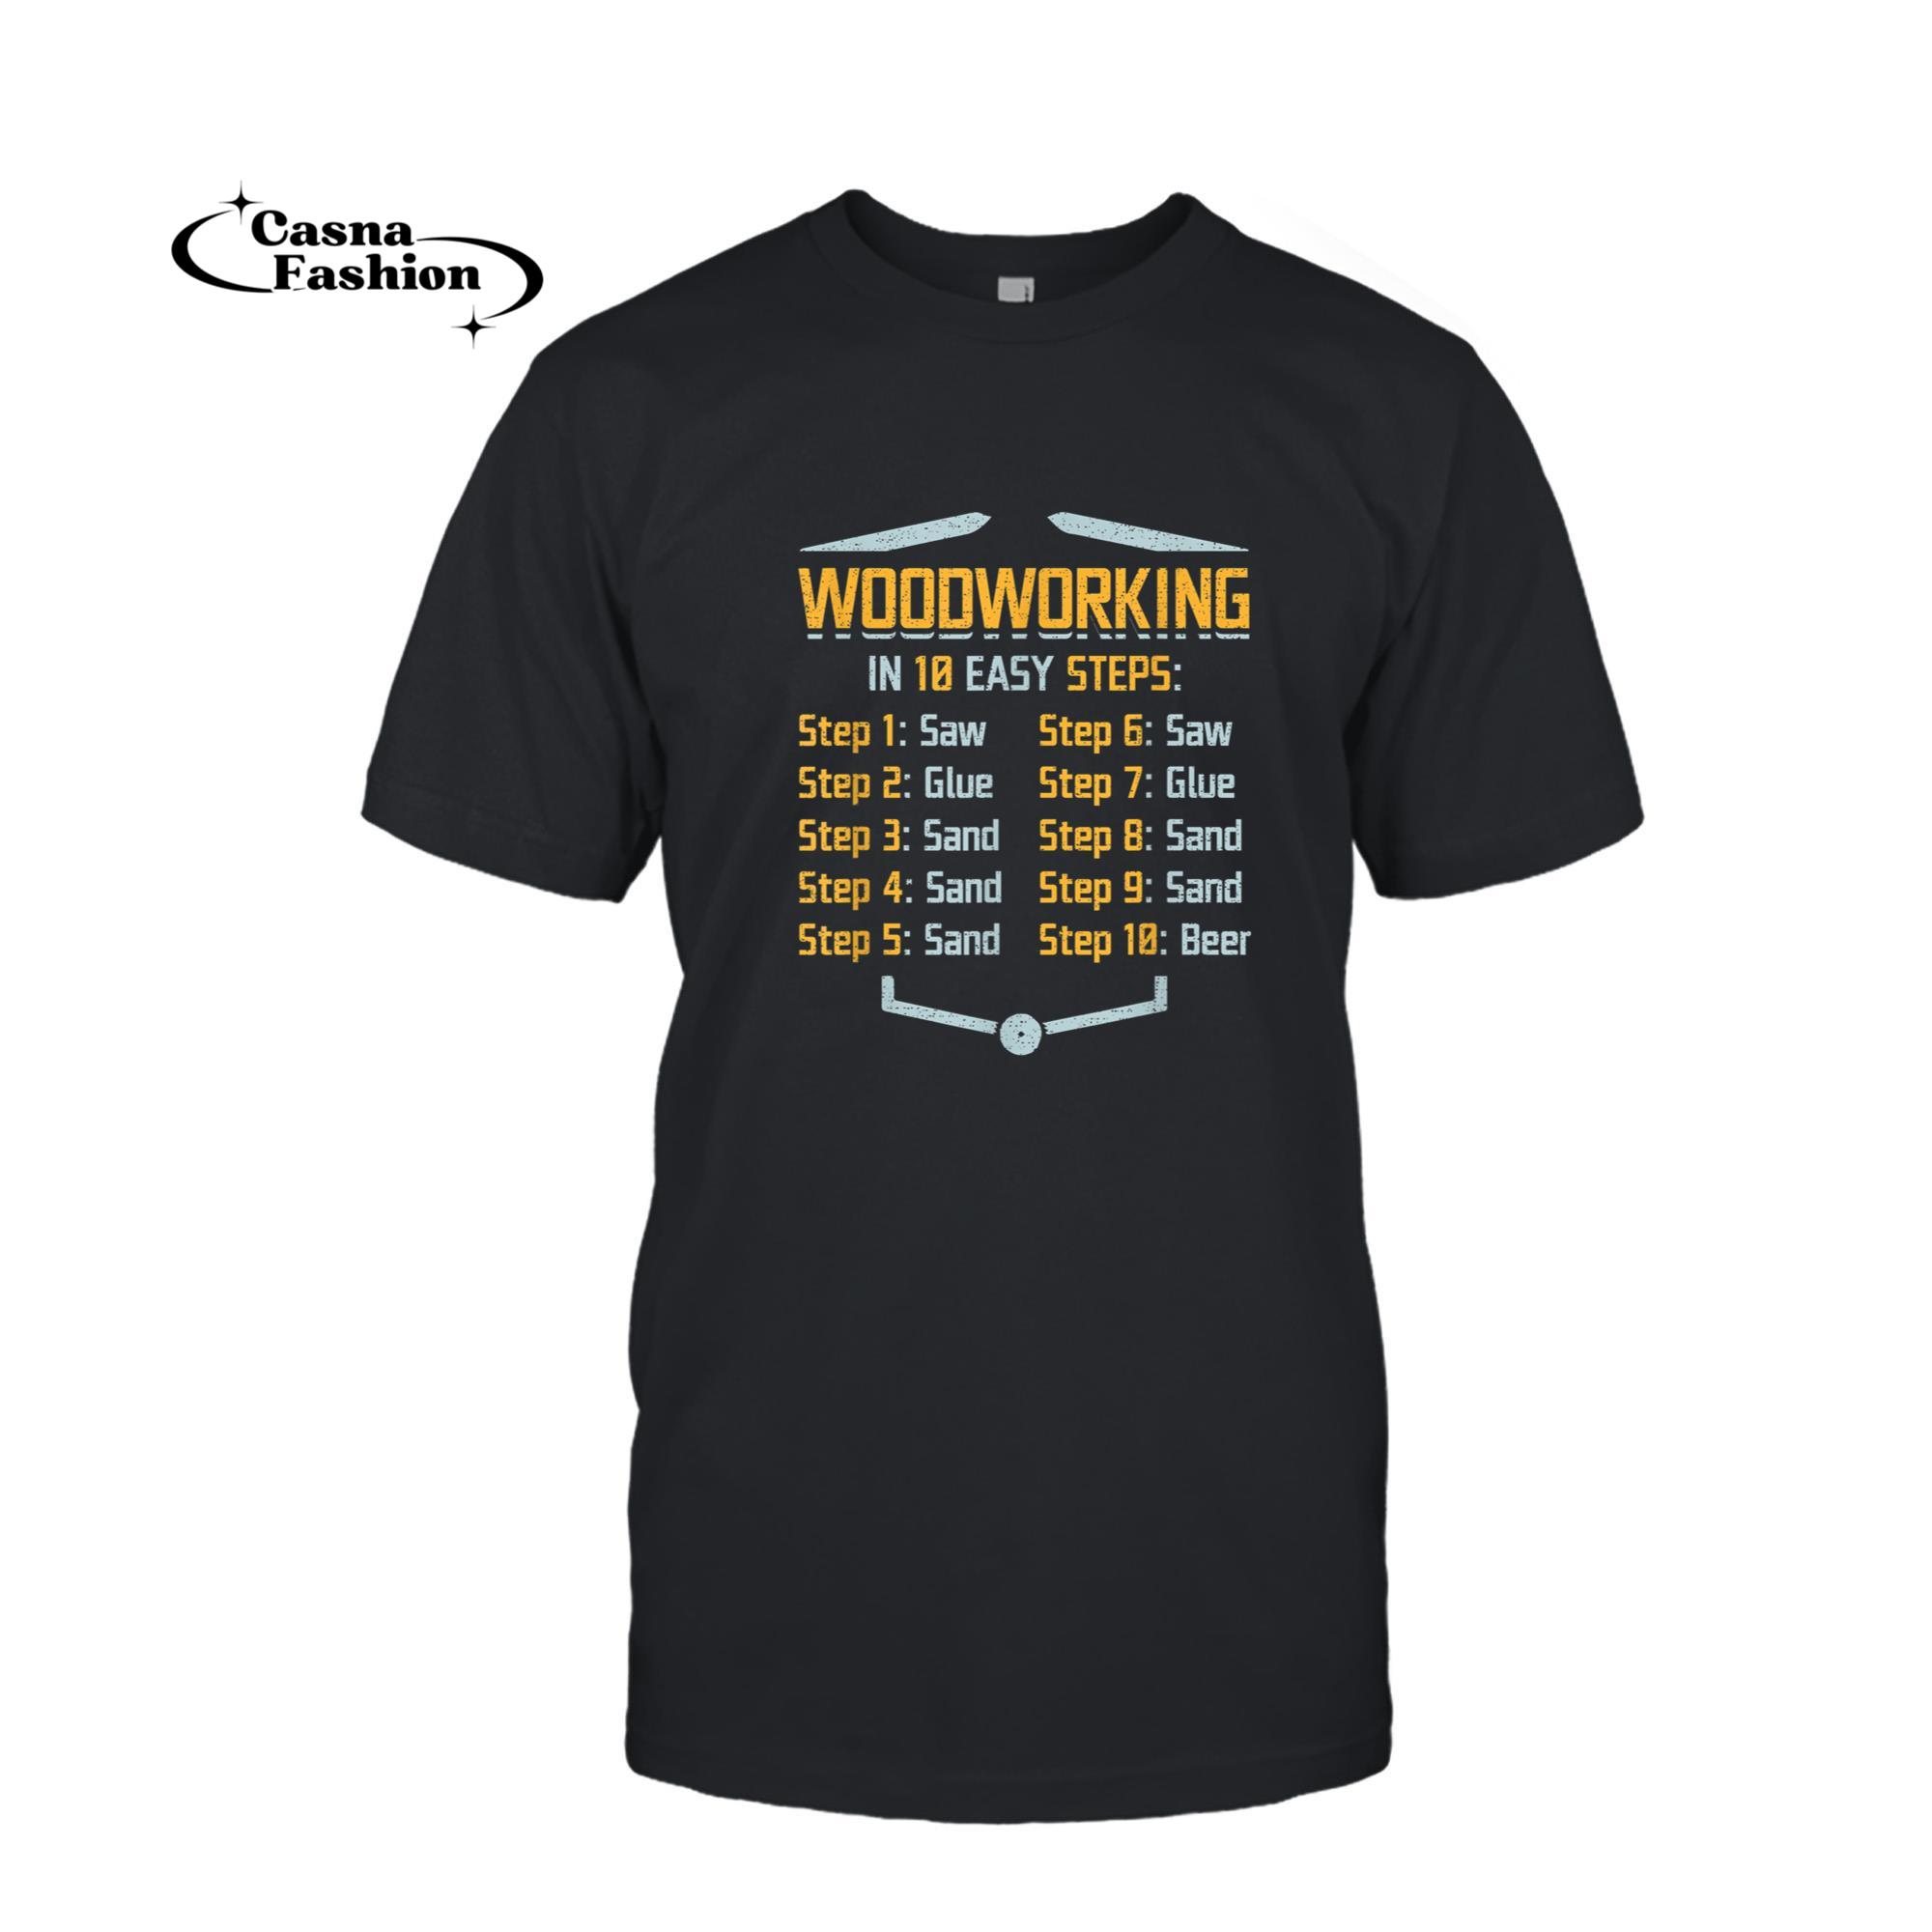 casnafashion_T-shirt_10 Easy Steps Of Woodworking Carpenter Woodworker Gift T-Shirt_T-shirt_Black